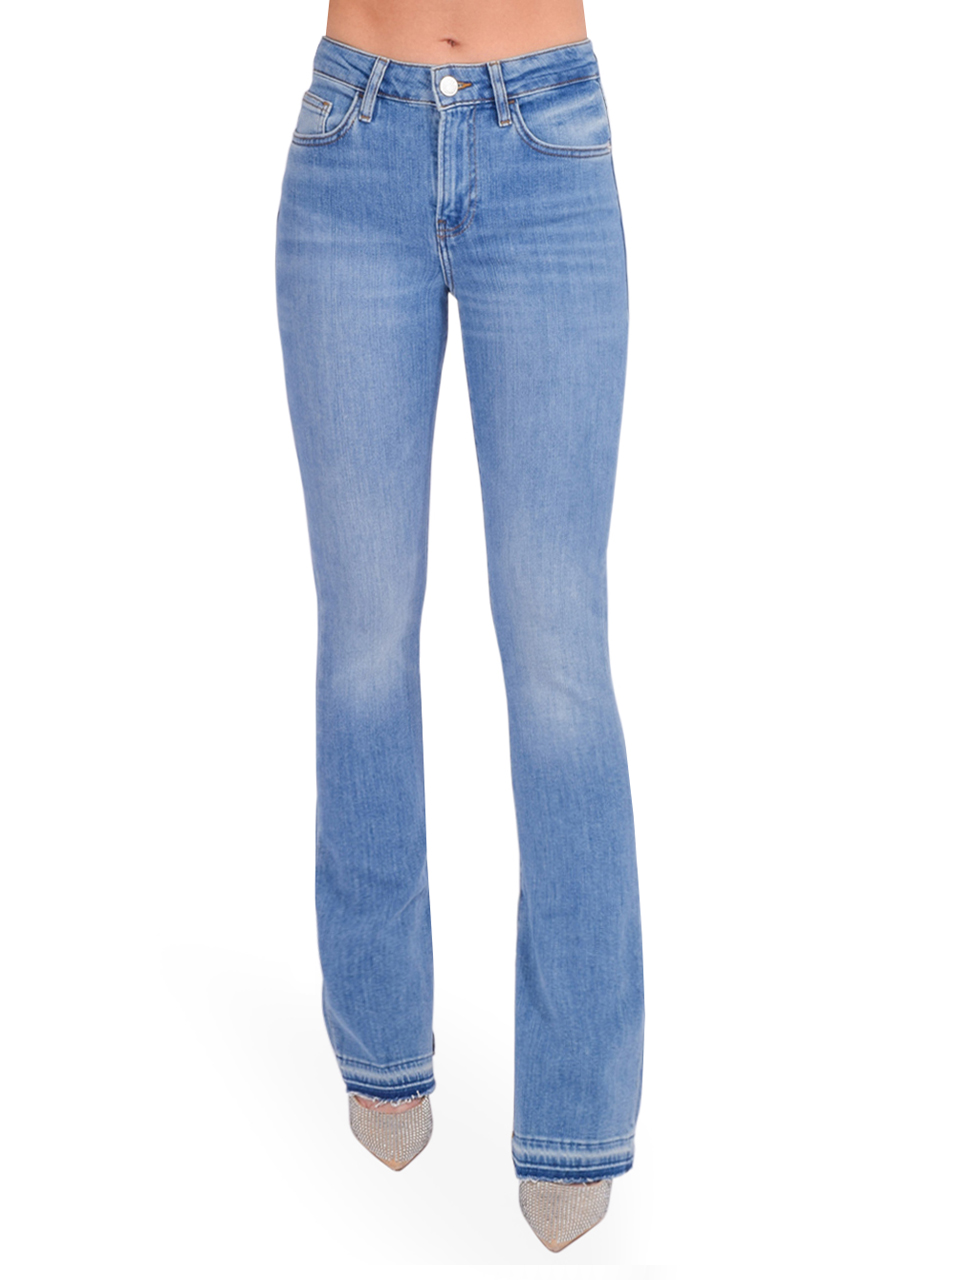 FRAME Le Mini Boot High Rise Bootcut Jean in Wavey Blue Front View 